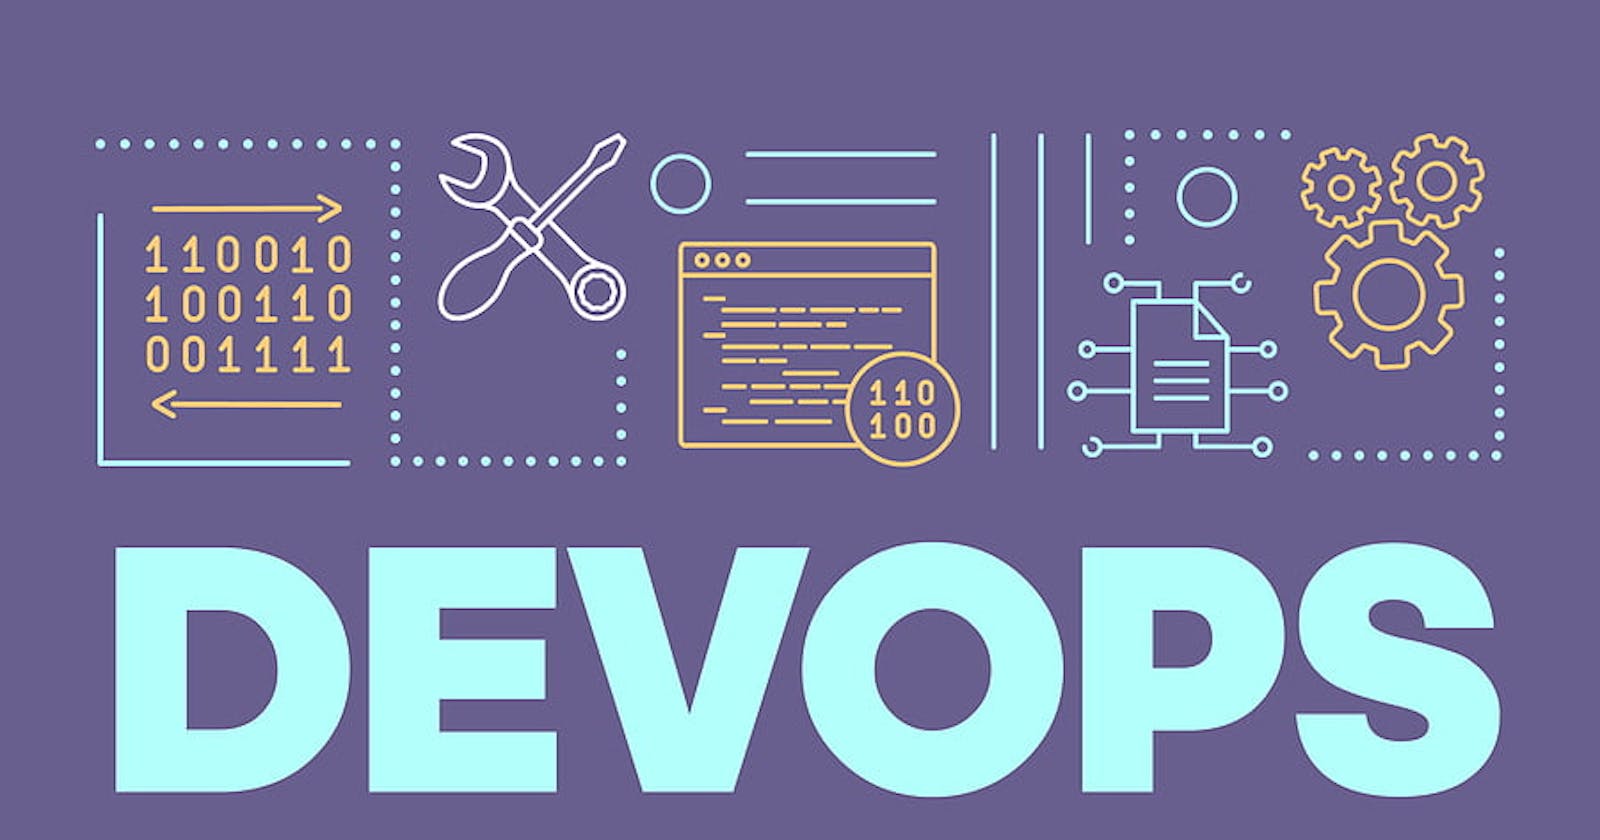 DevOps tools to begin with...